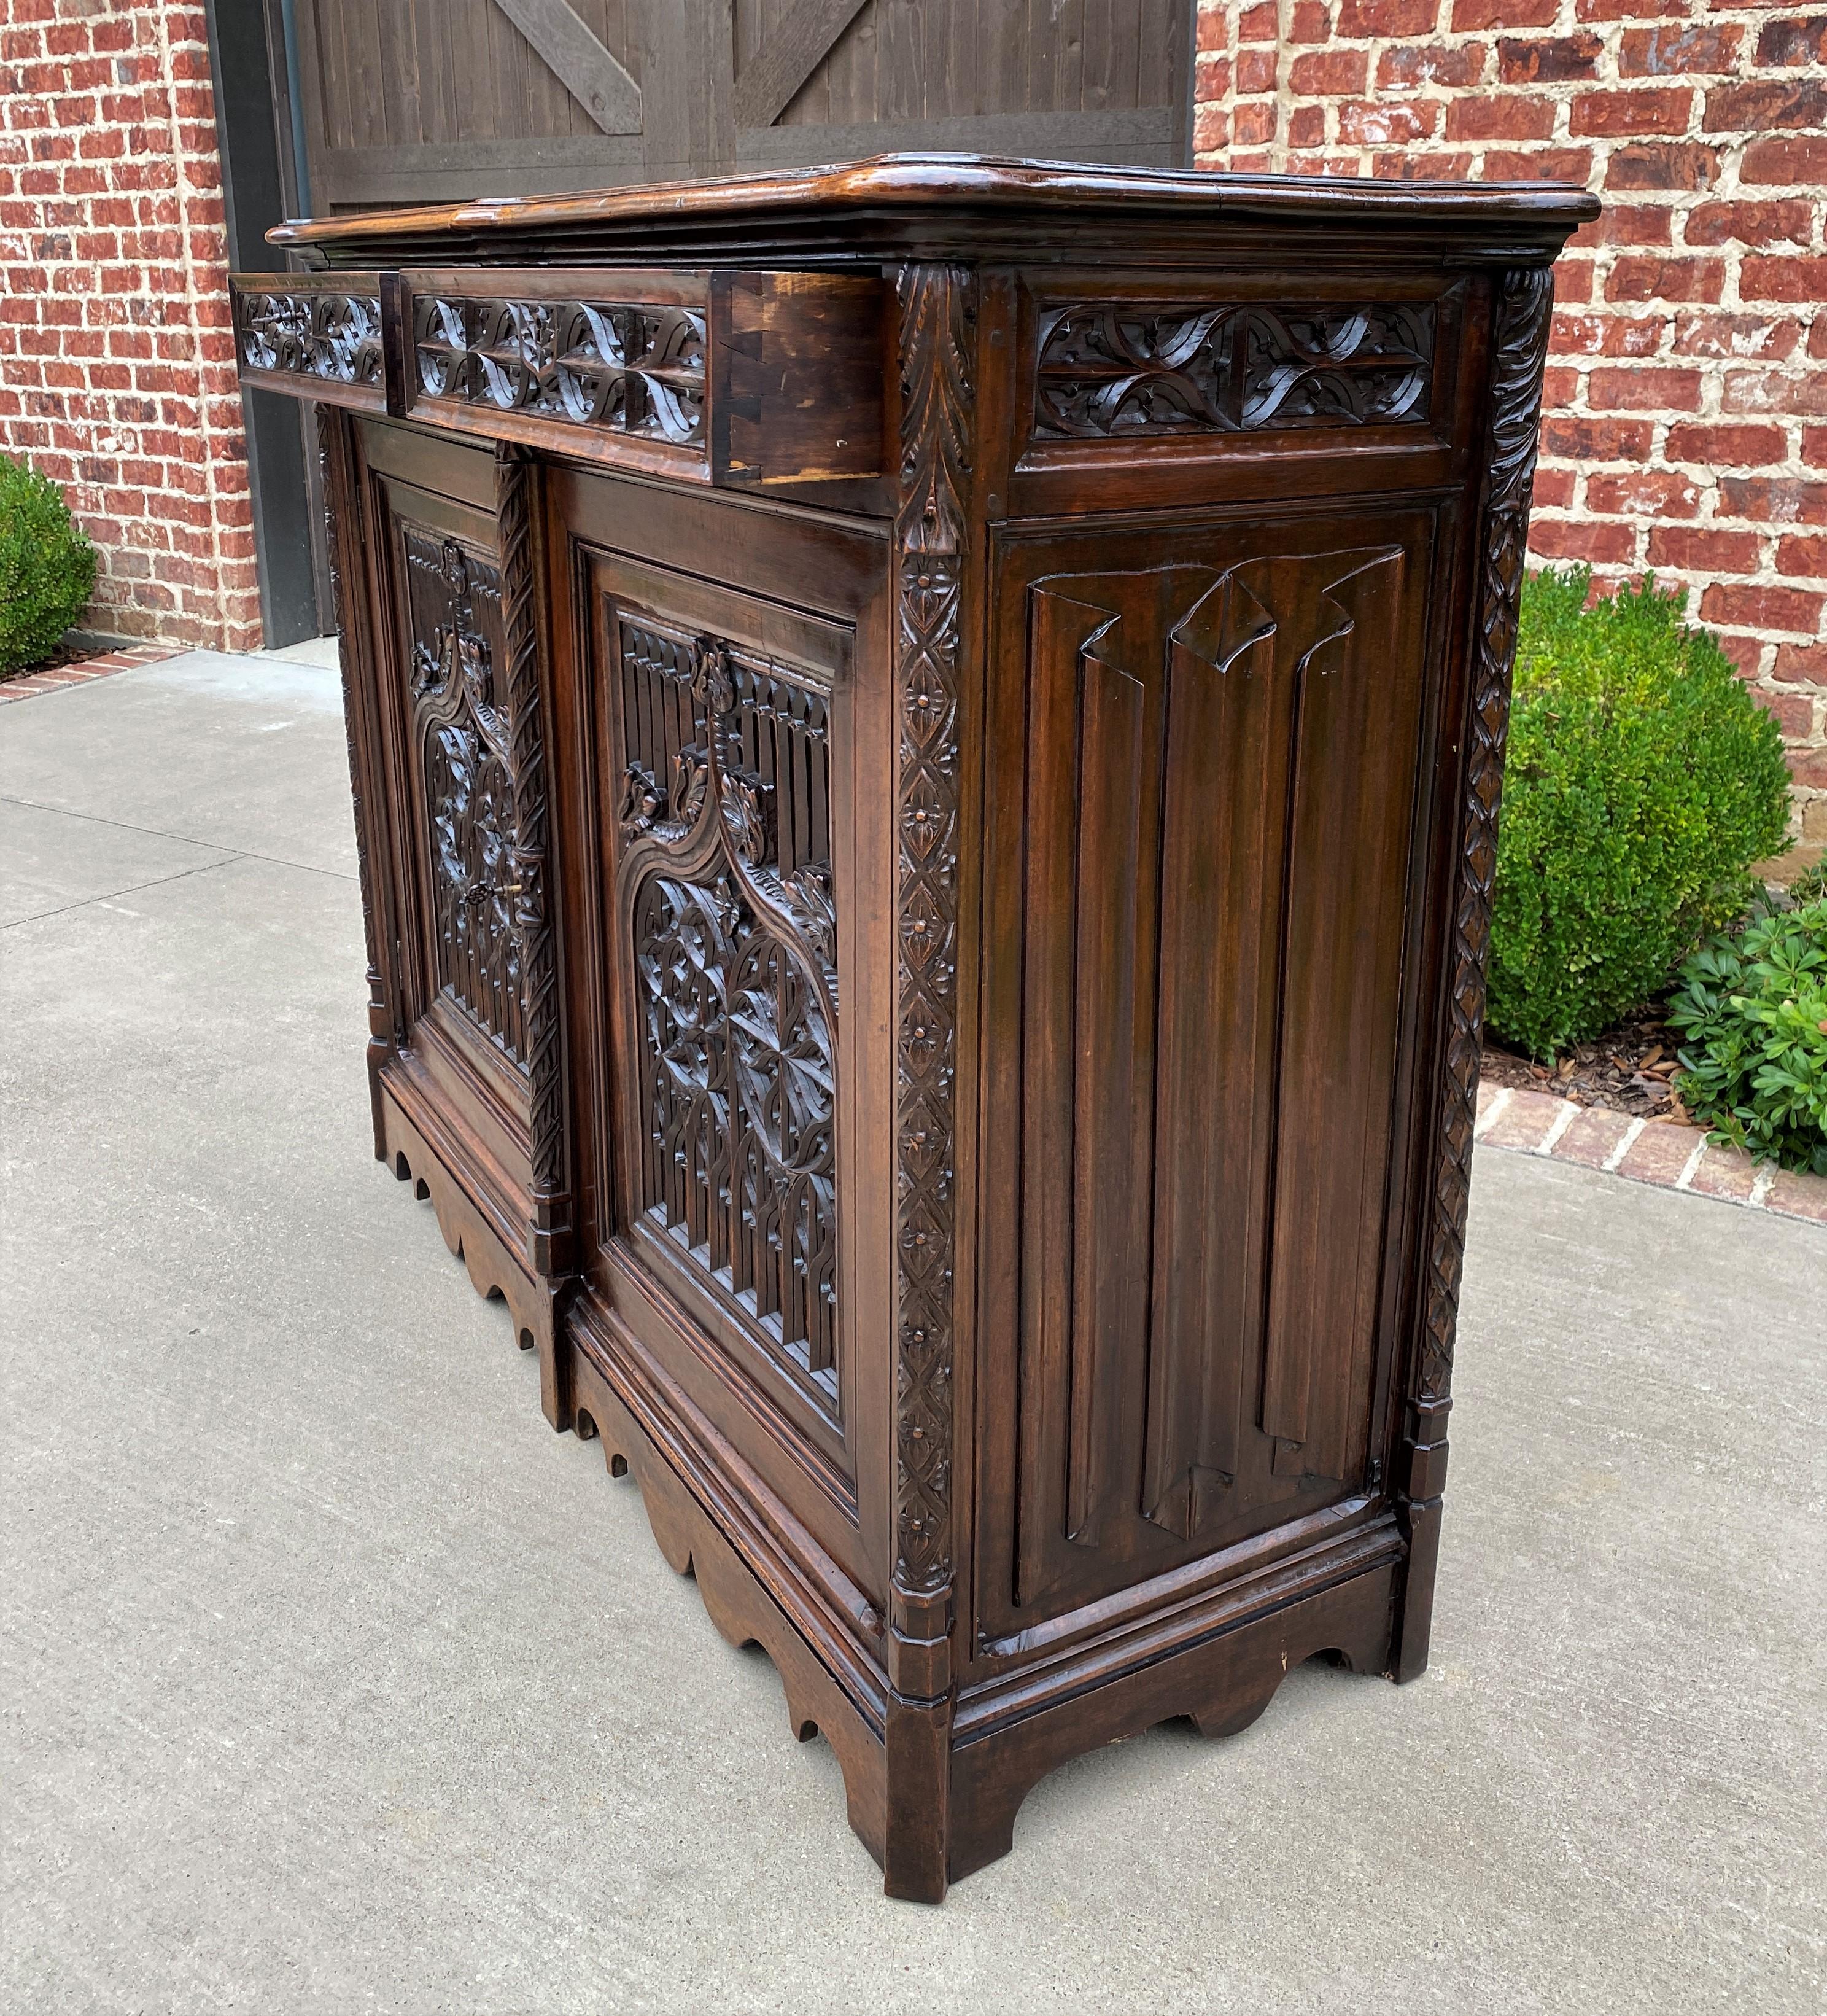 Antique French Sideboard Server Buffet Cabinet Gothic Revival Walnut 19thC 3